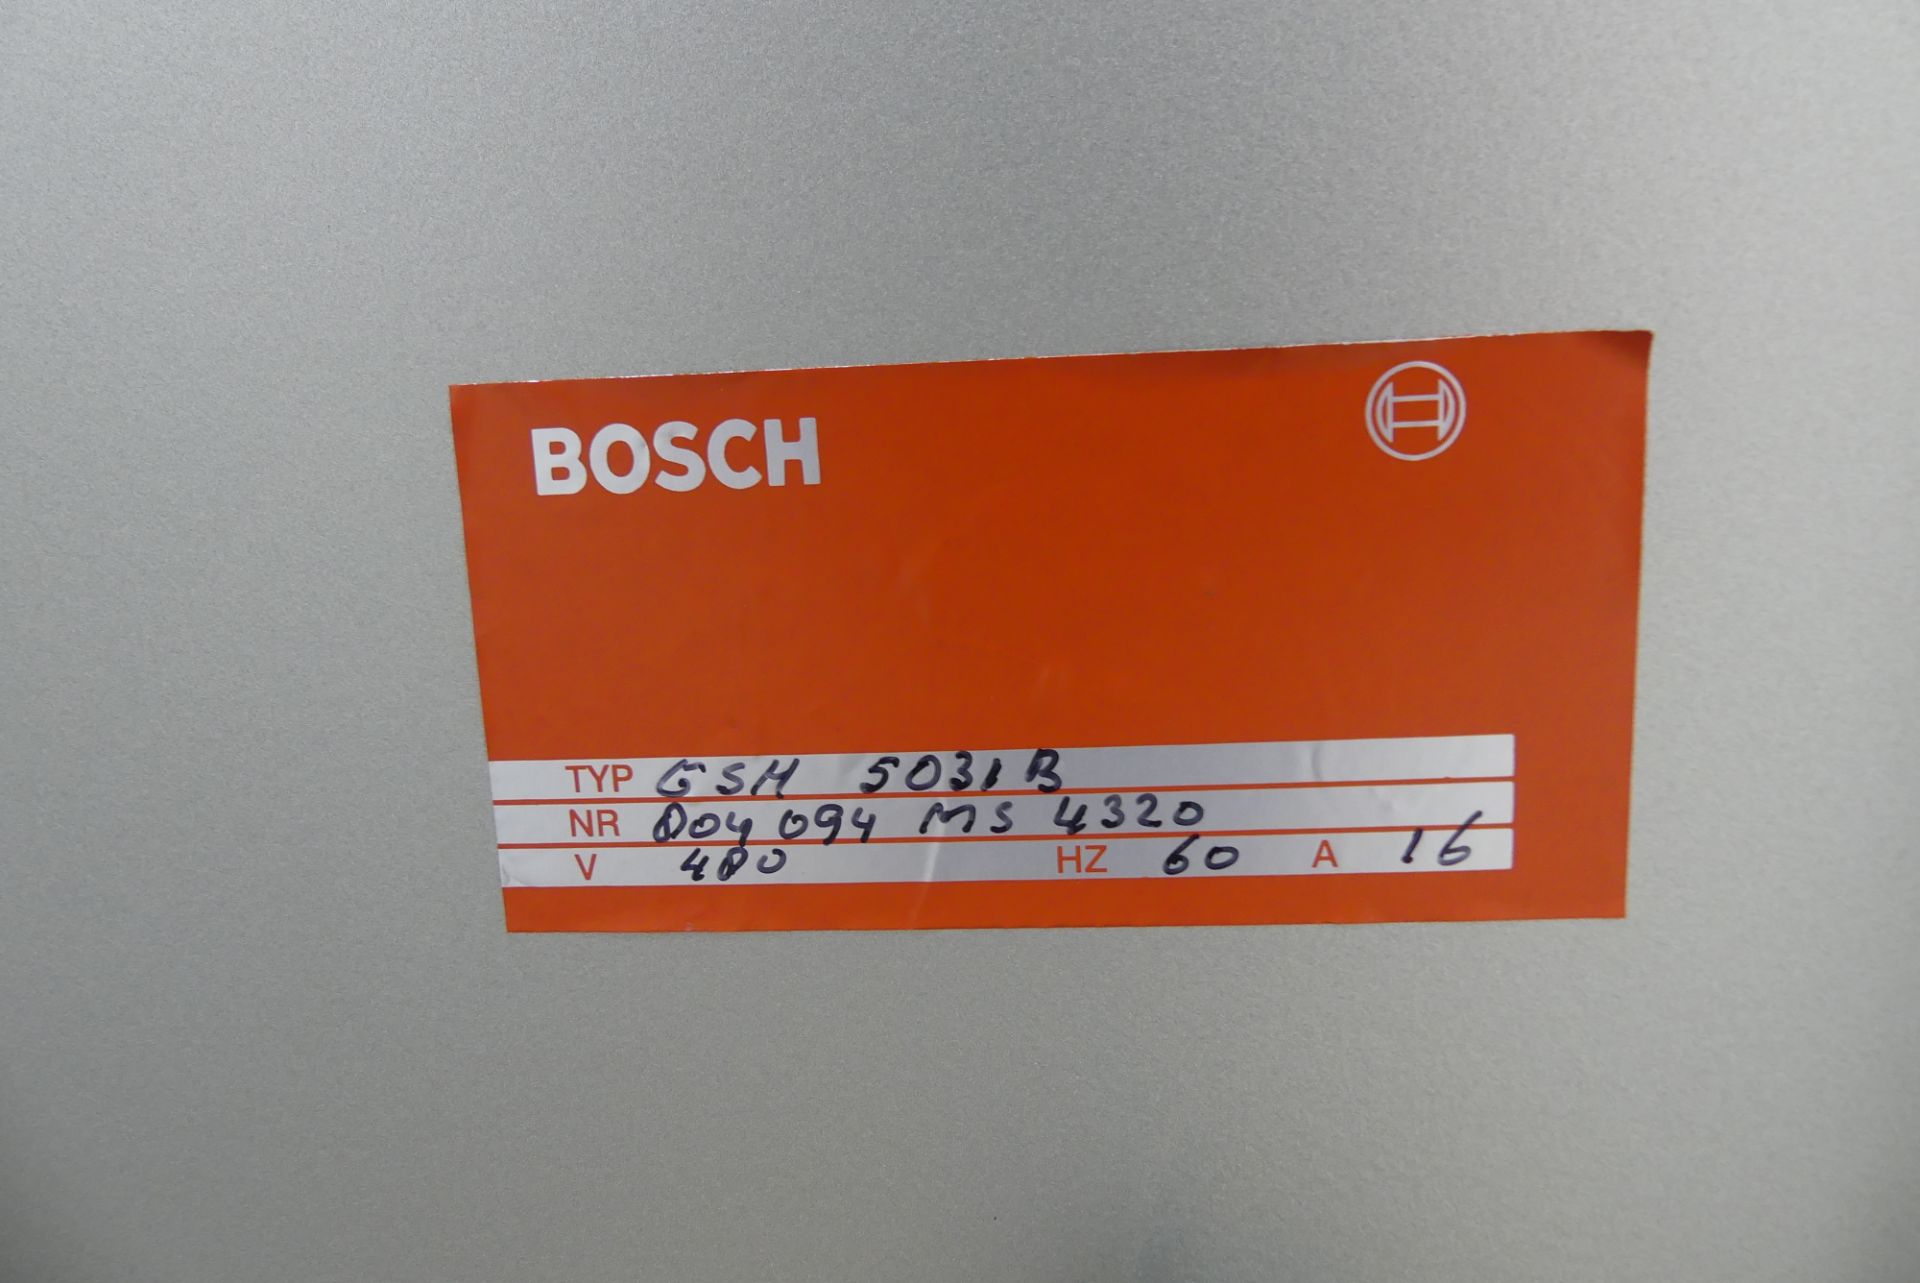 Bosch GSH 5031B Pick and Place Case Packer - Image 23 of 75